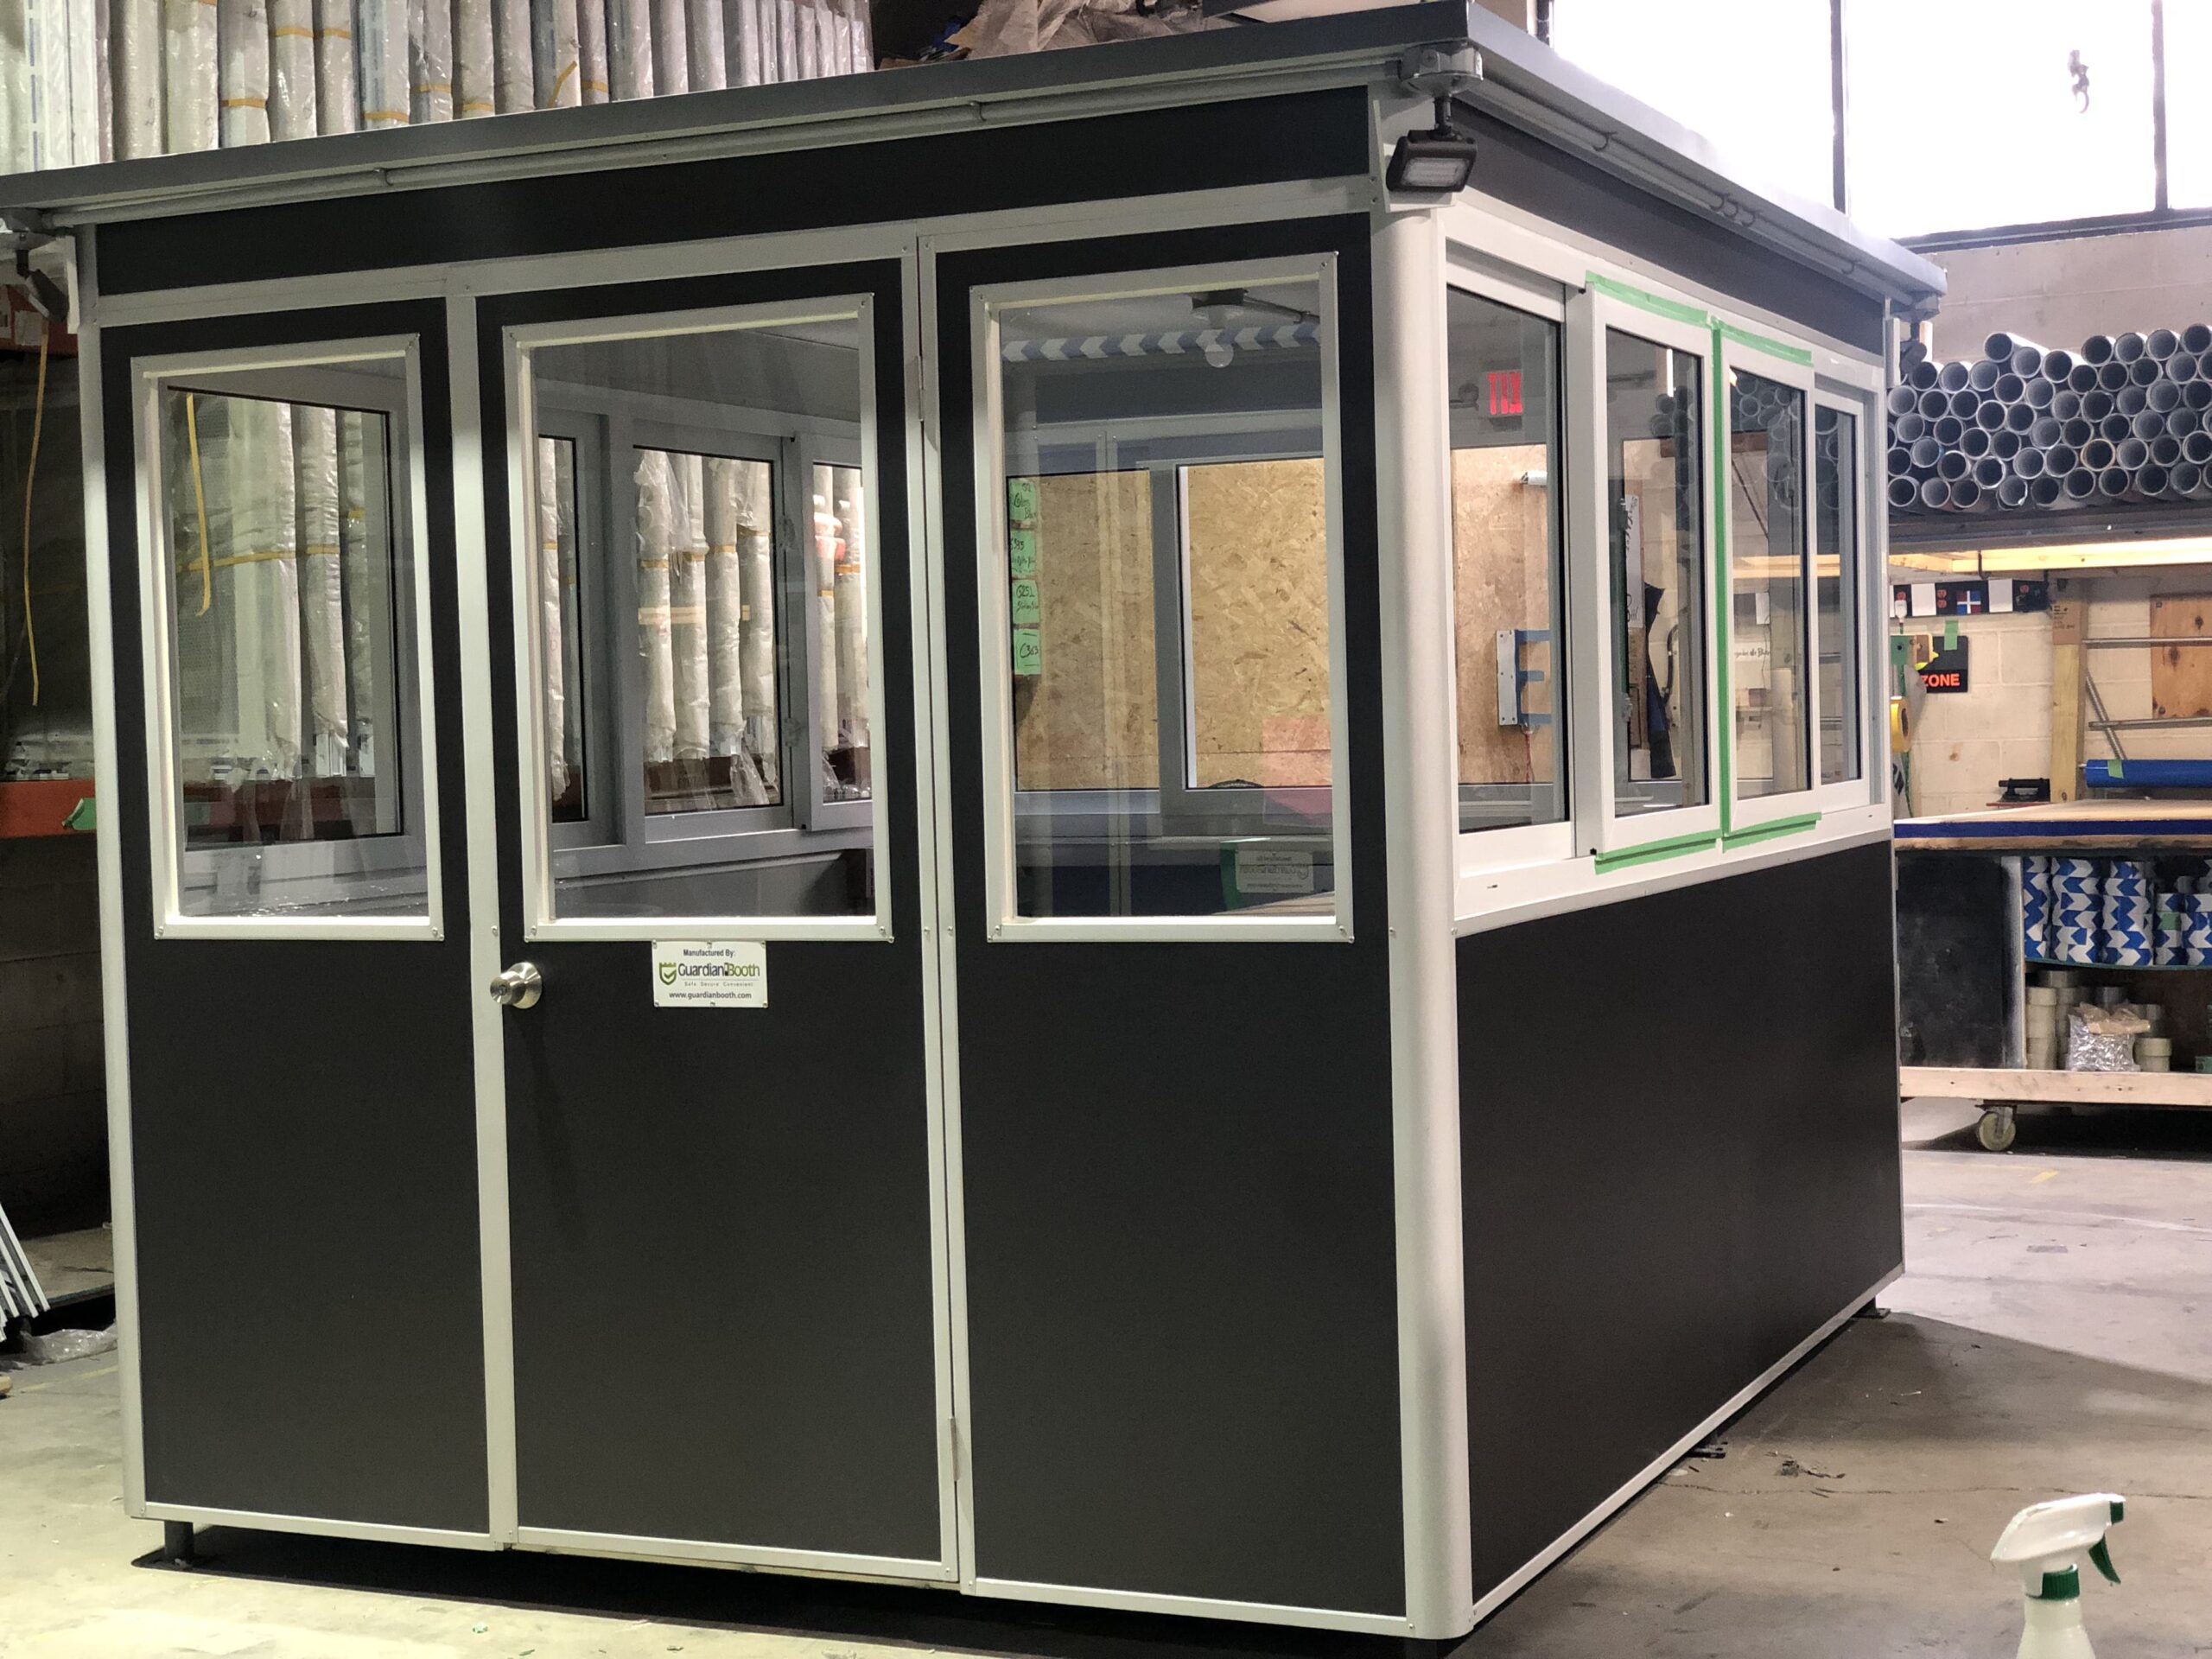 8x8 guard booth